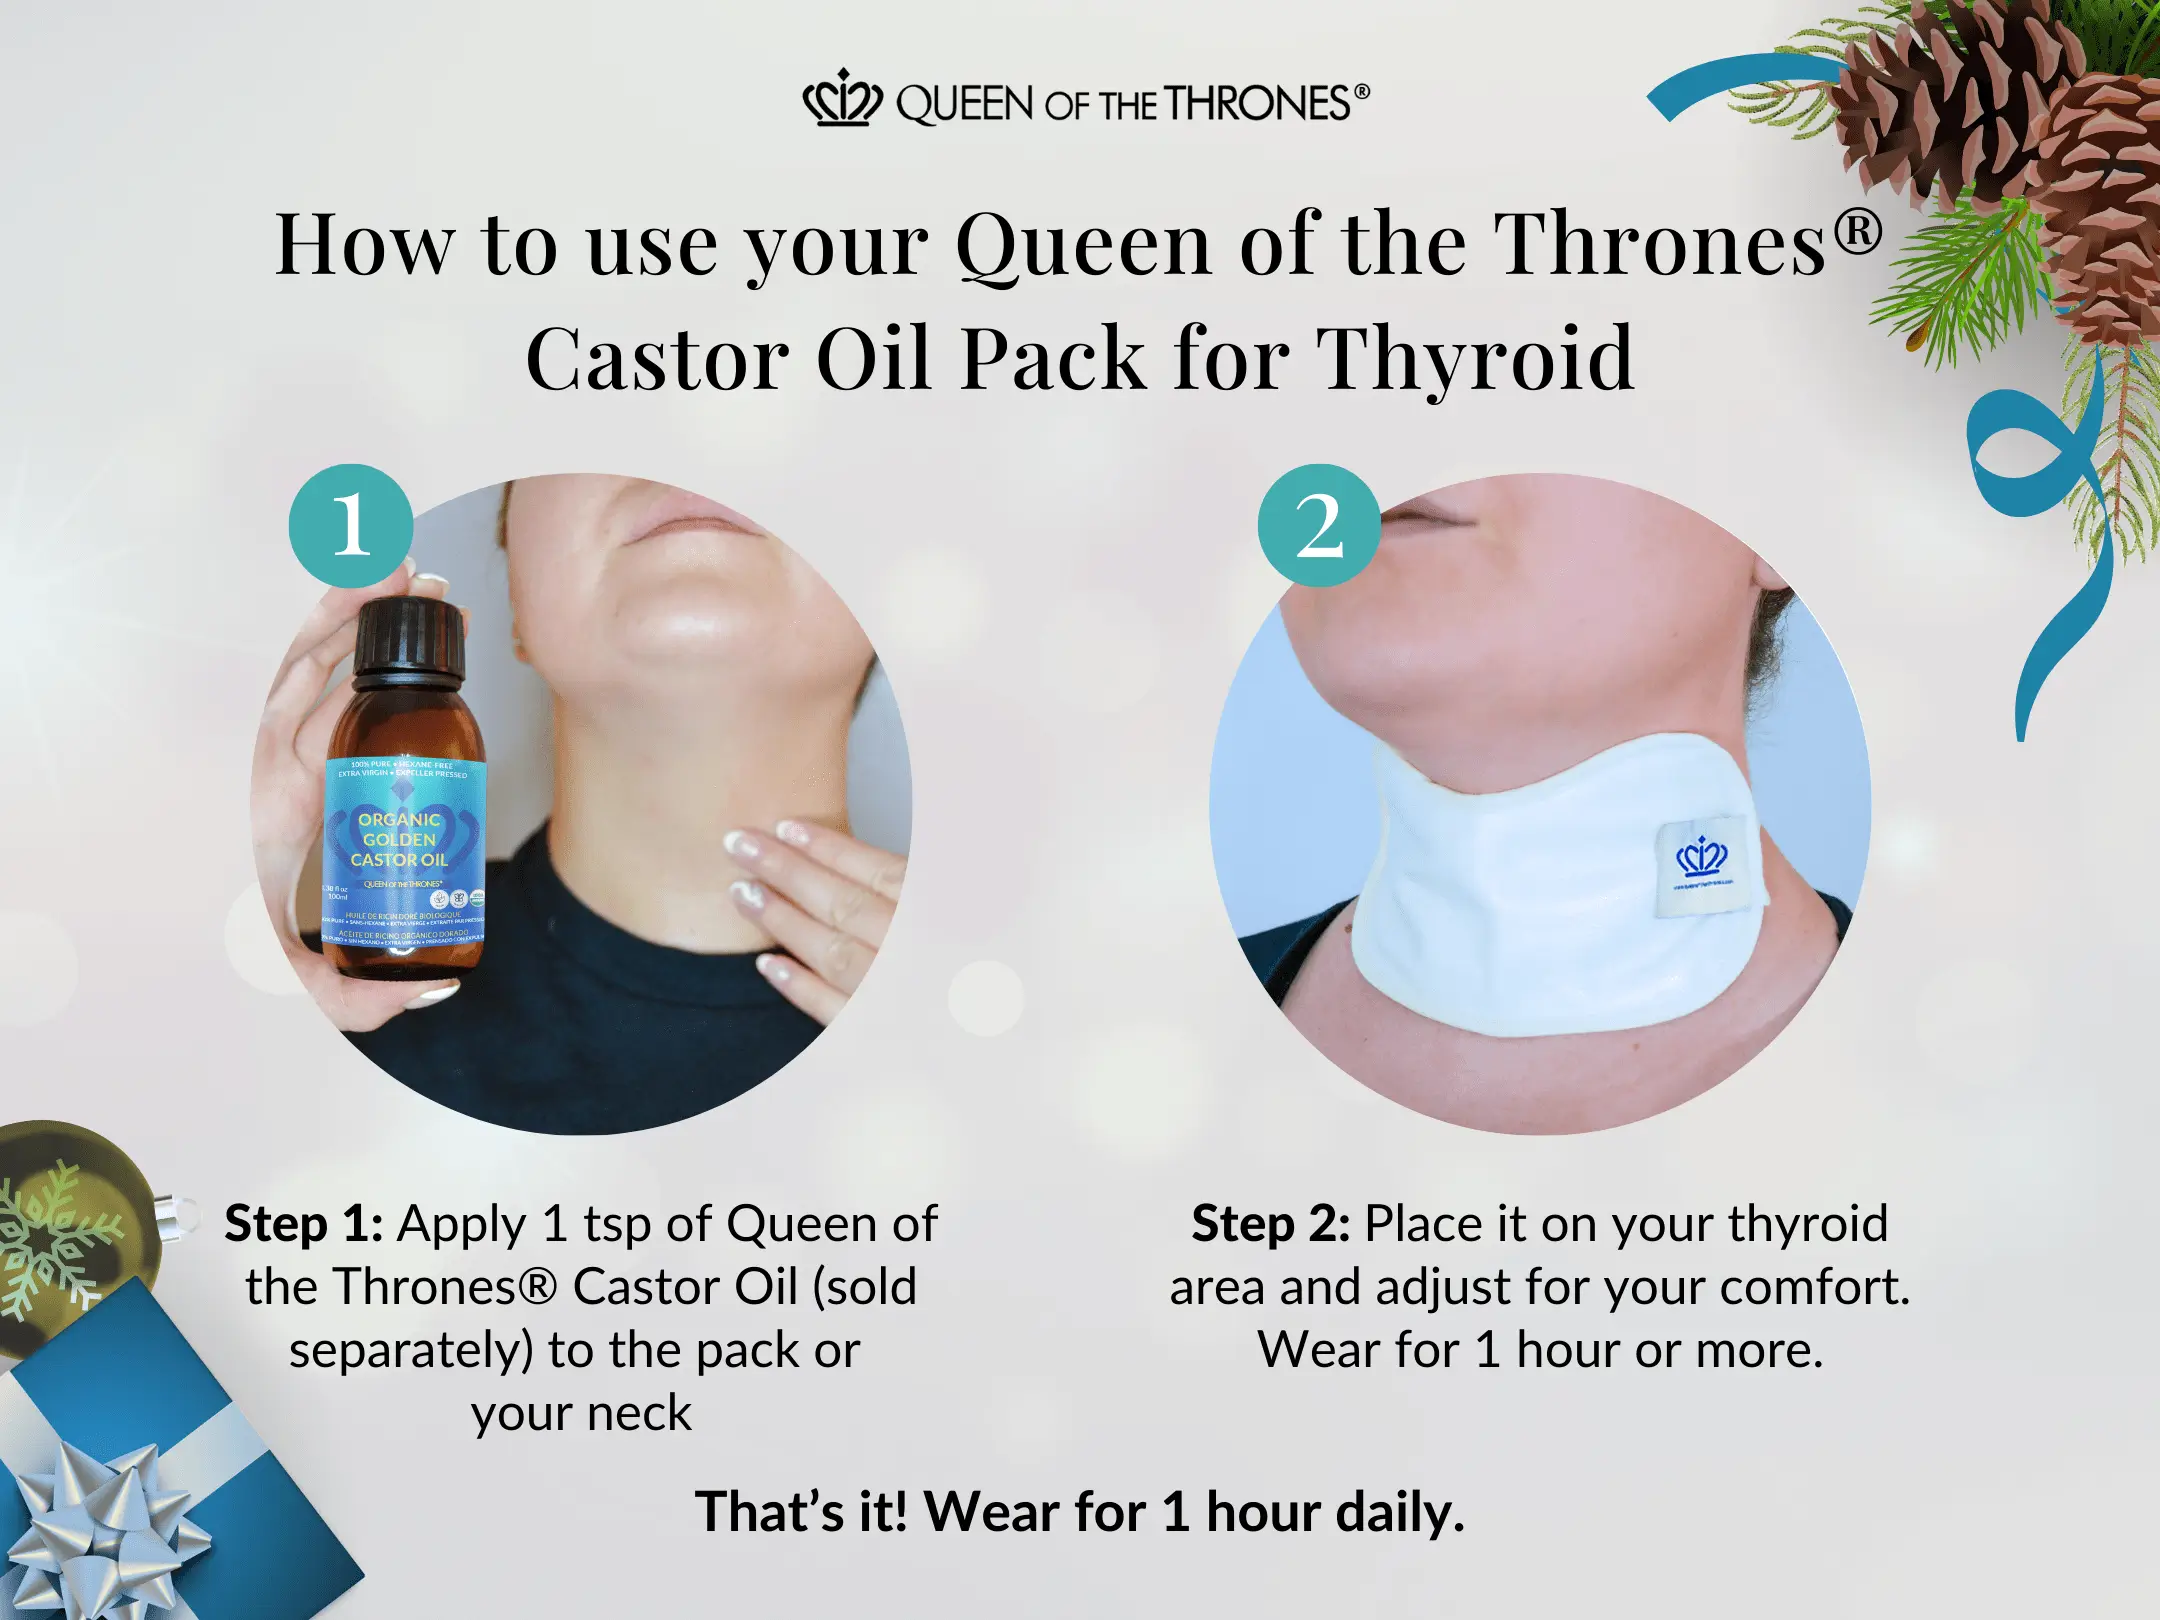 How to use Queen of the thrones Castor oil pack for thyroid